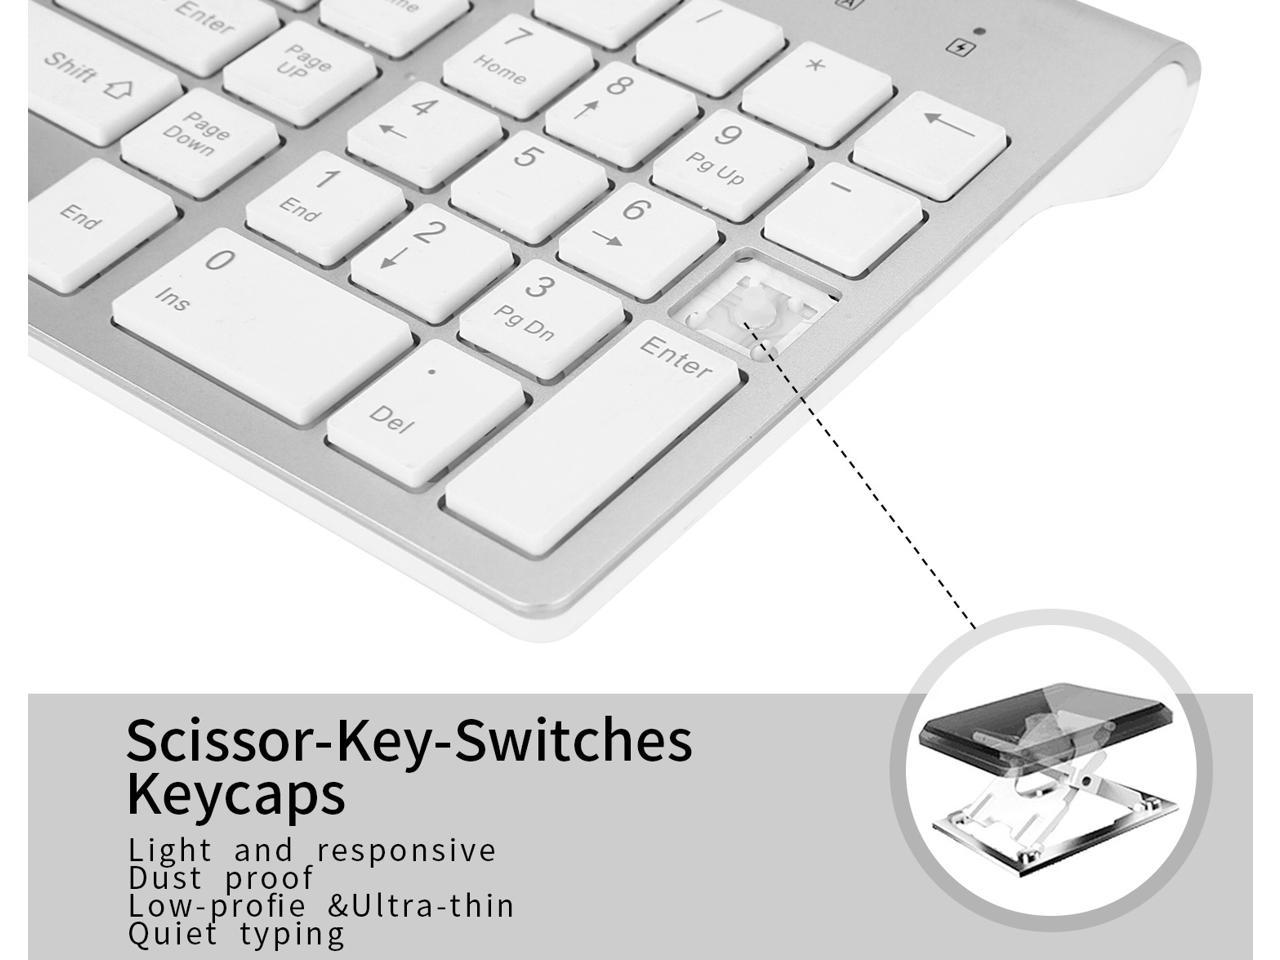 can i connect apple keyboard to pc